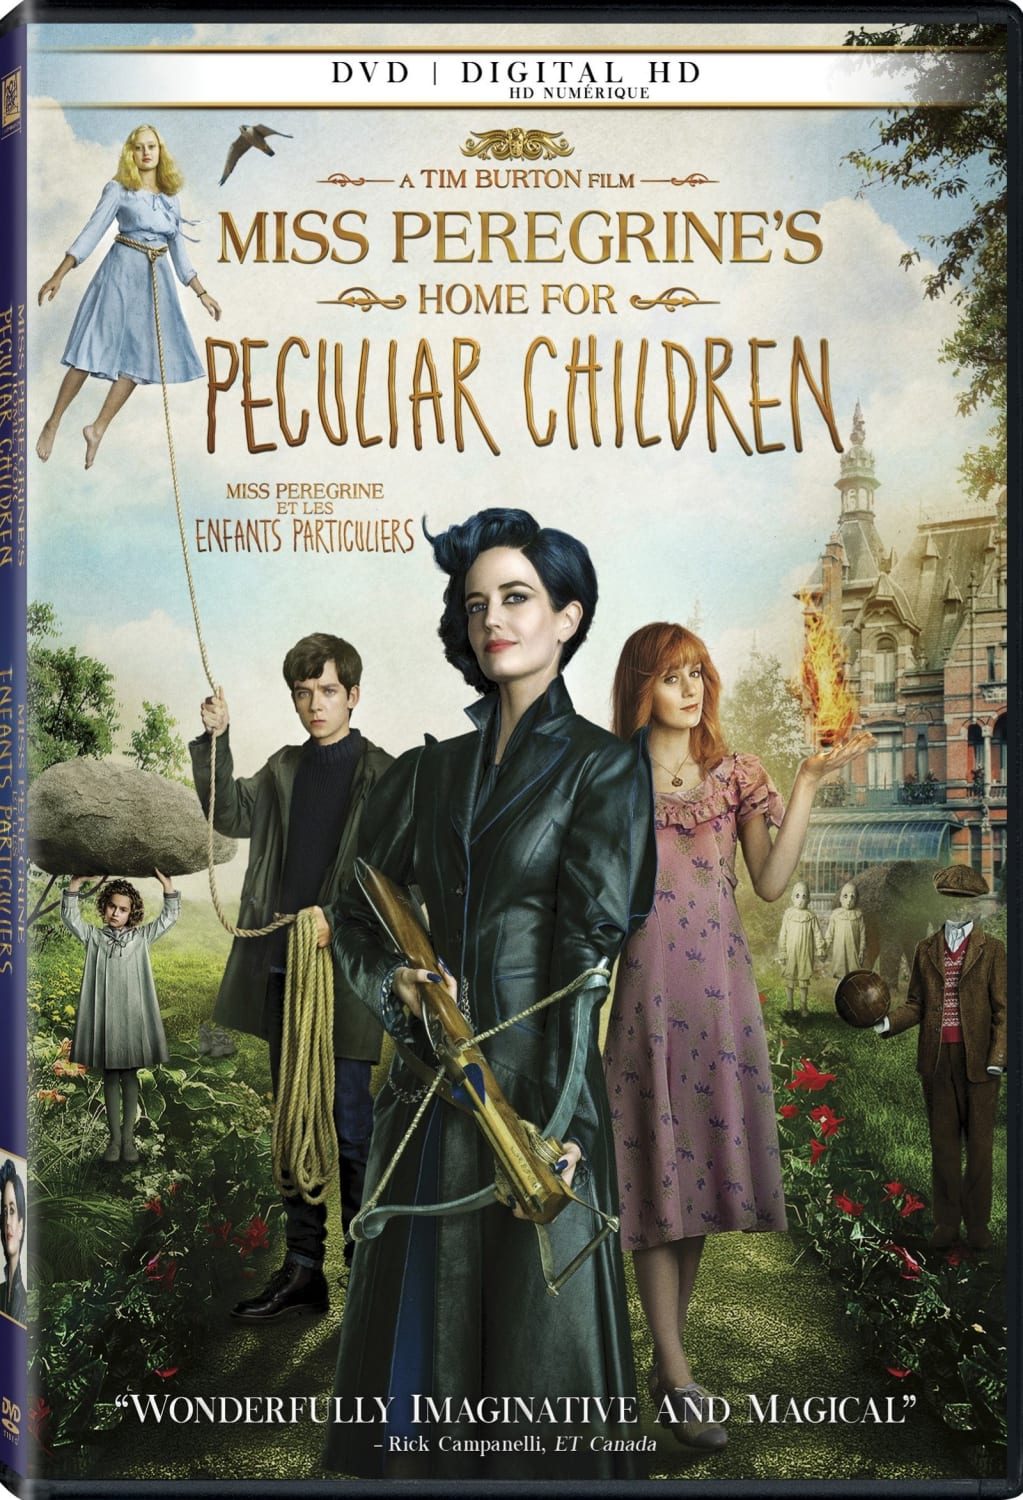 Miss Peregrine’s Home For Peculiar Children (DVD)